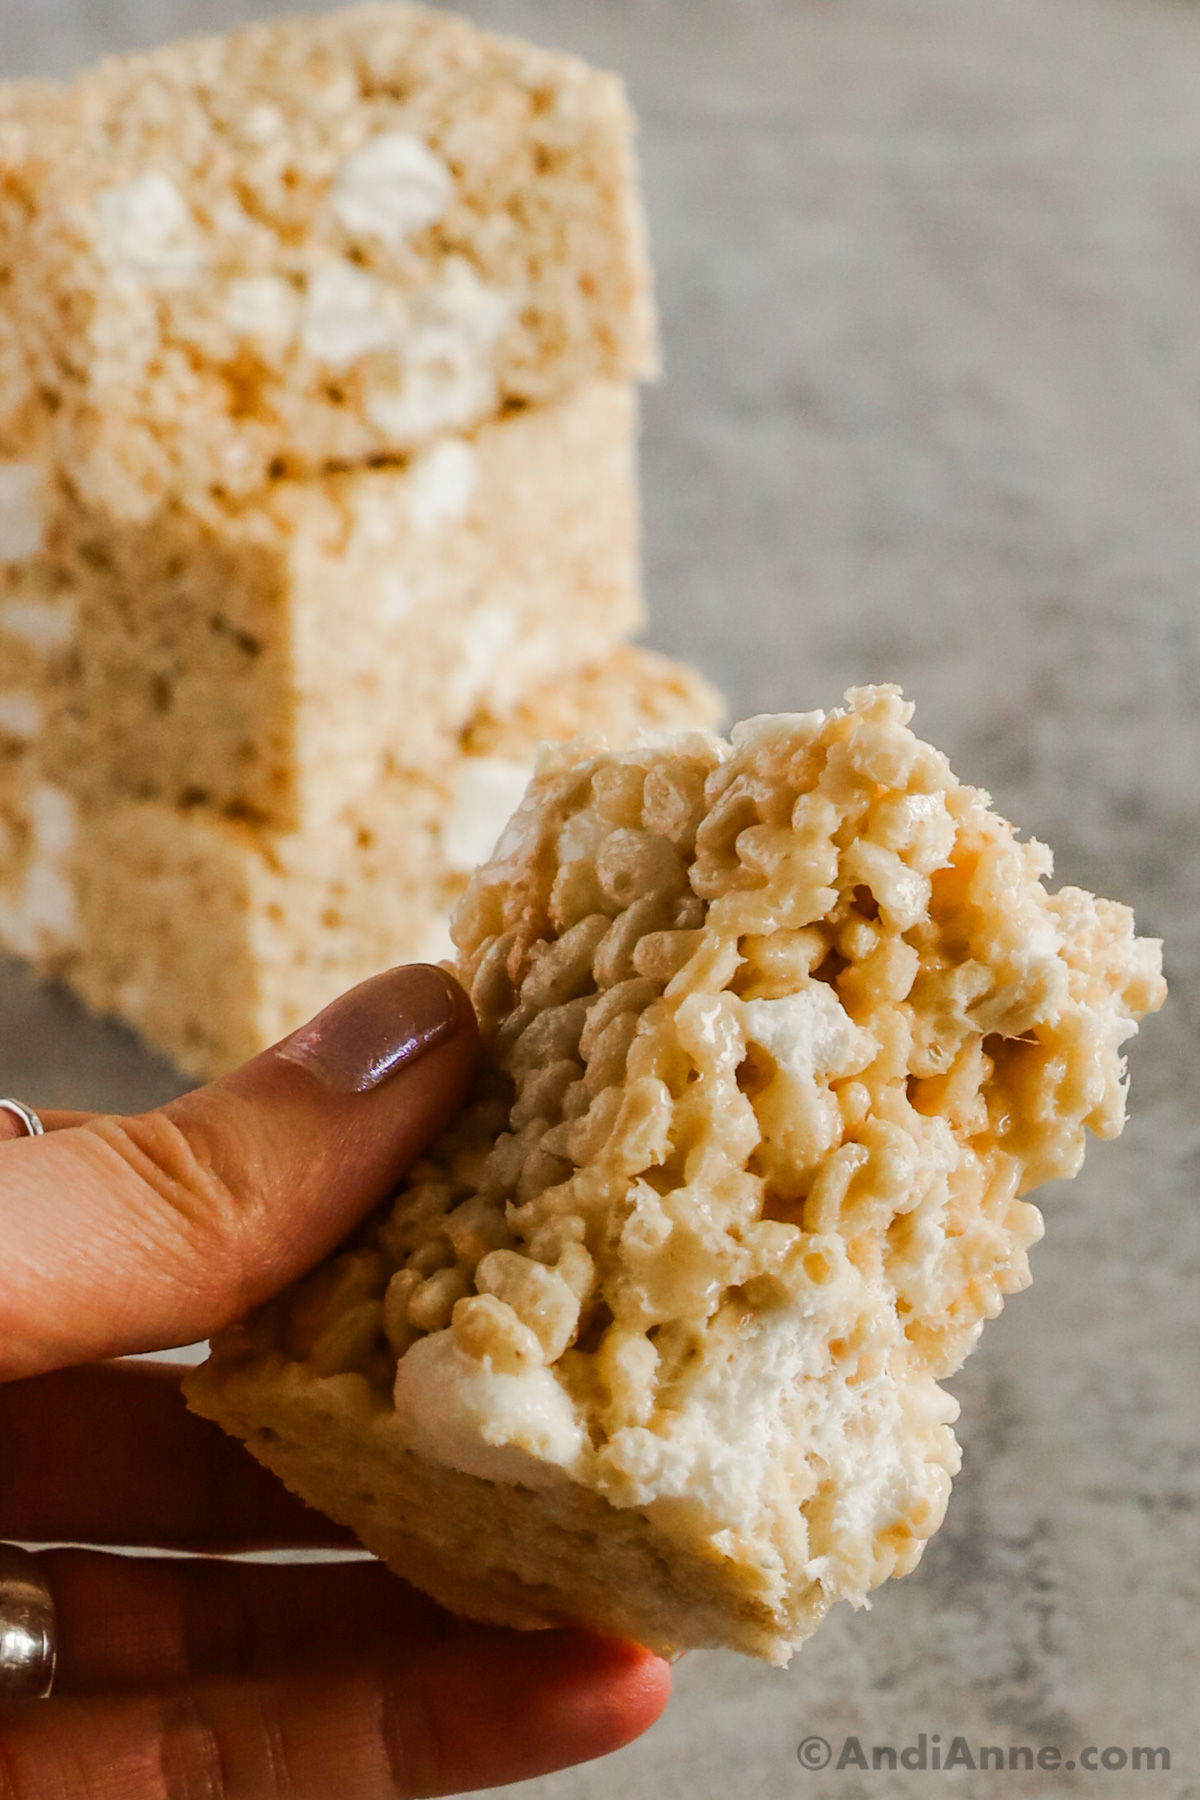 A hand holding half of a rice krispie treat.